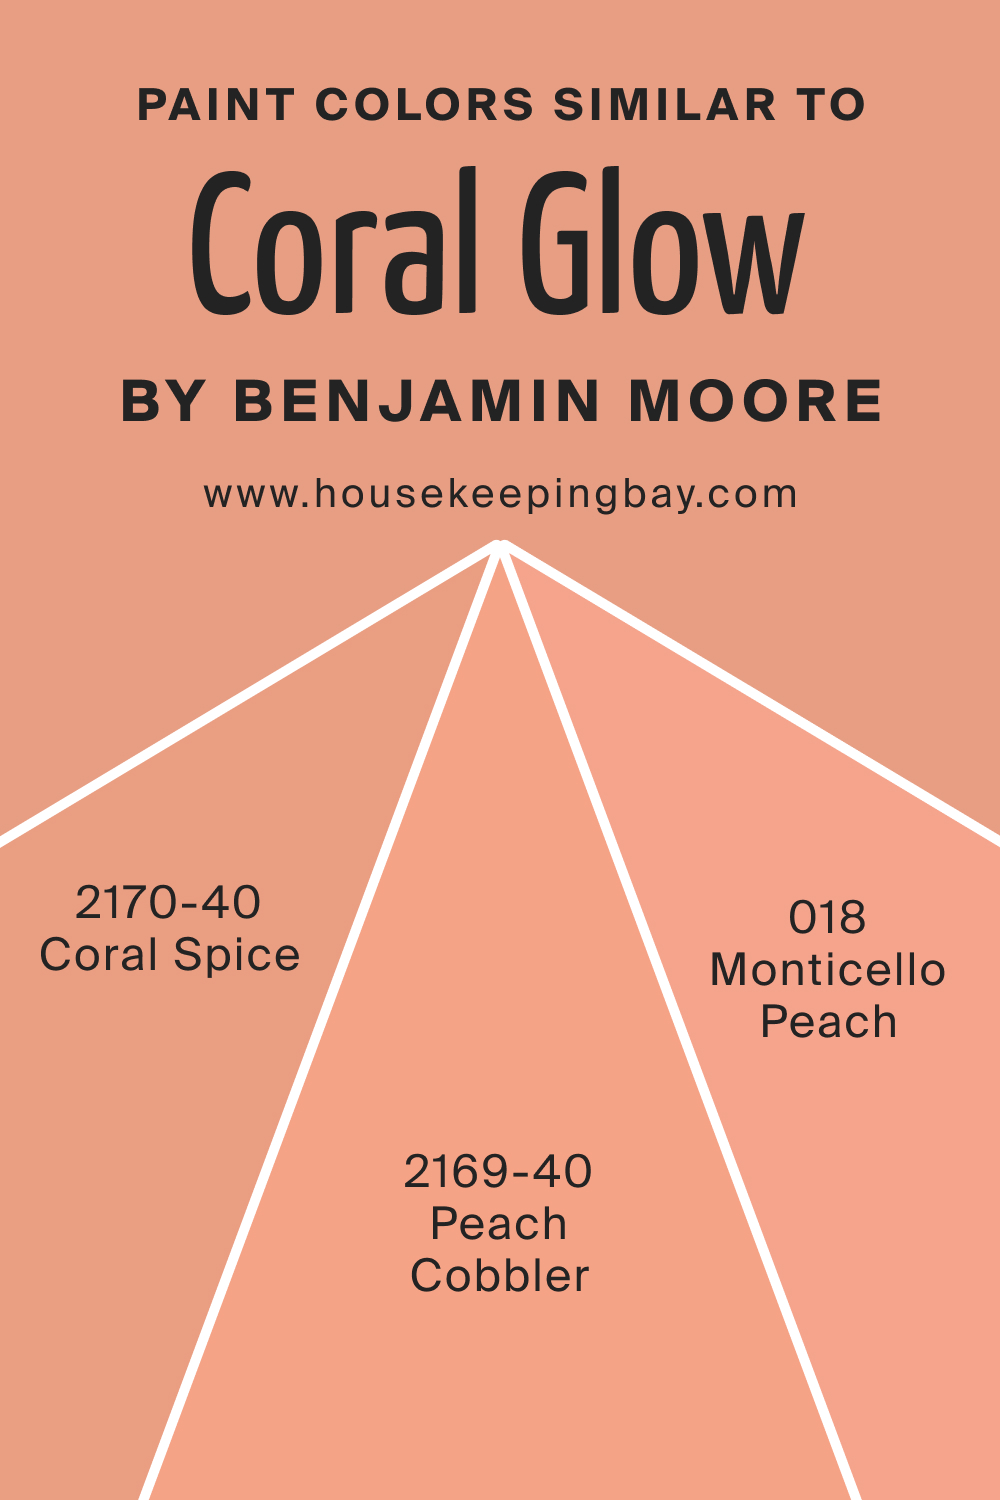 Paint Colors Similar to Coral Glow 026 by Benjamin Moore